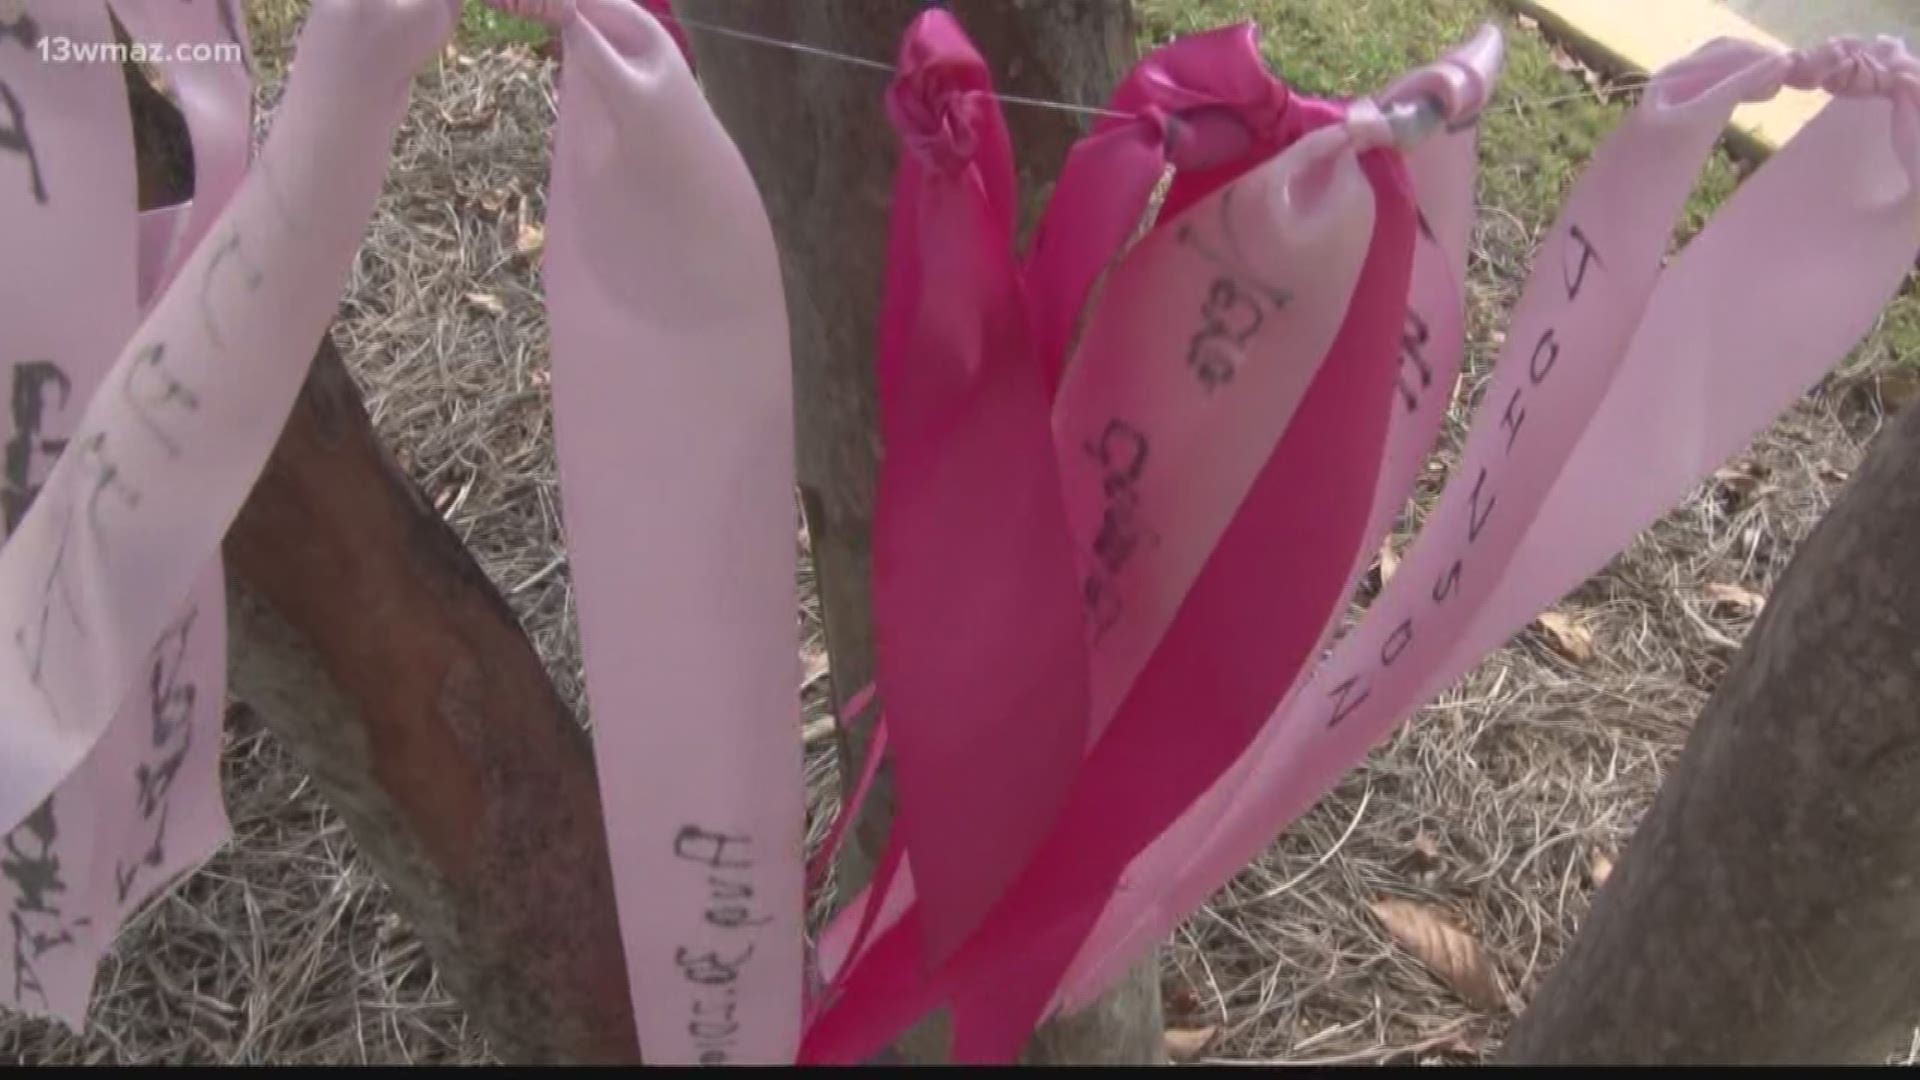 For breast cancer awareness month, Coliseum medical center encourages people to tie pink ribbons to tree outside cancer center.